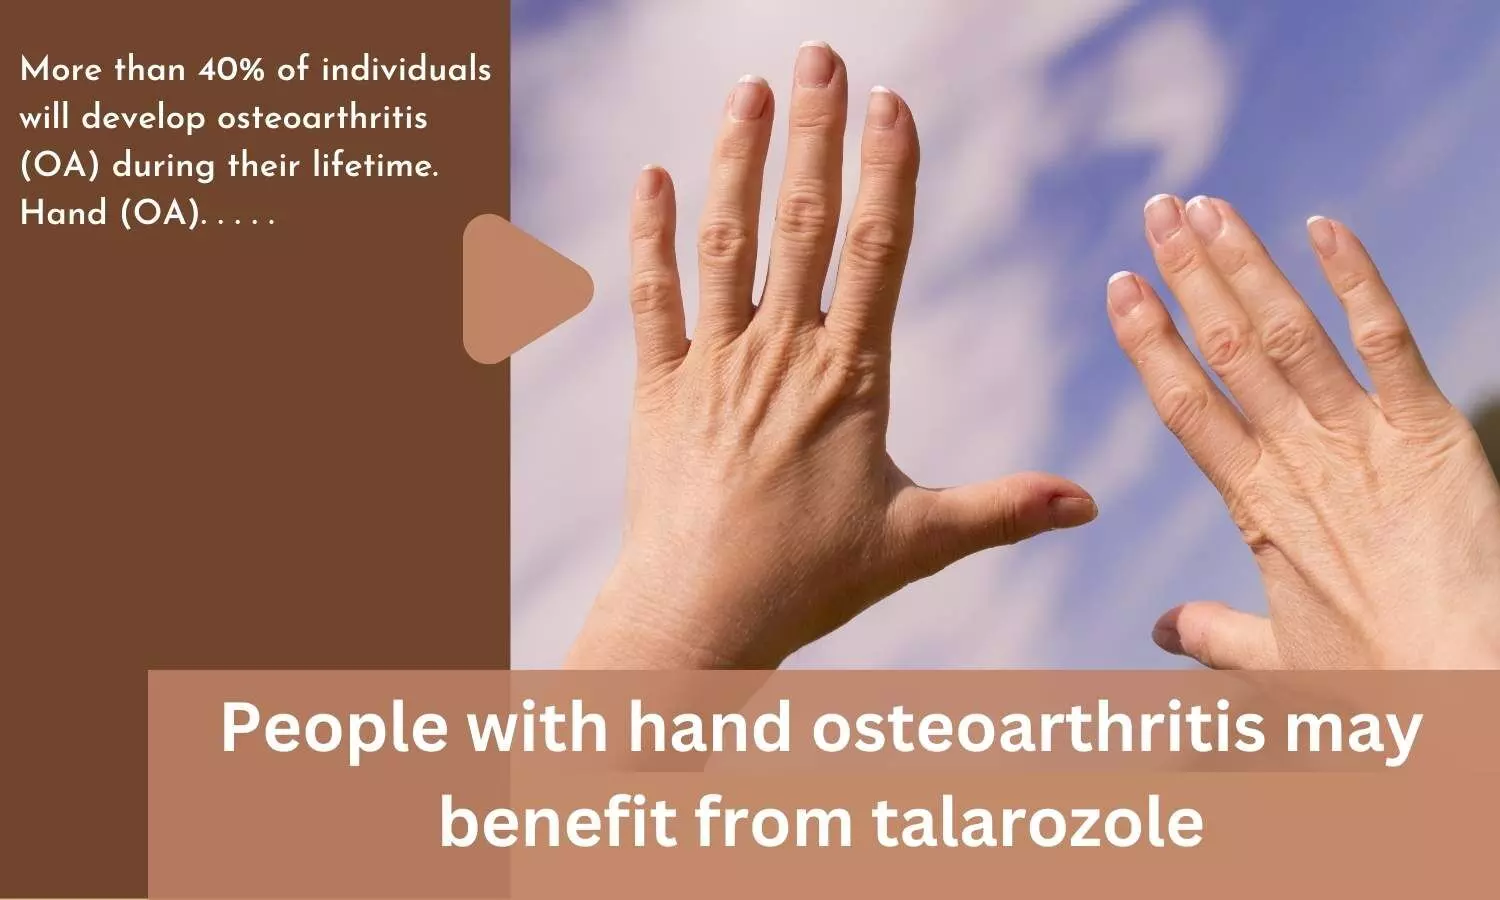 People with hand osteoarthritis may benefit from talarozole